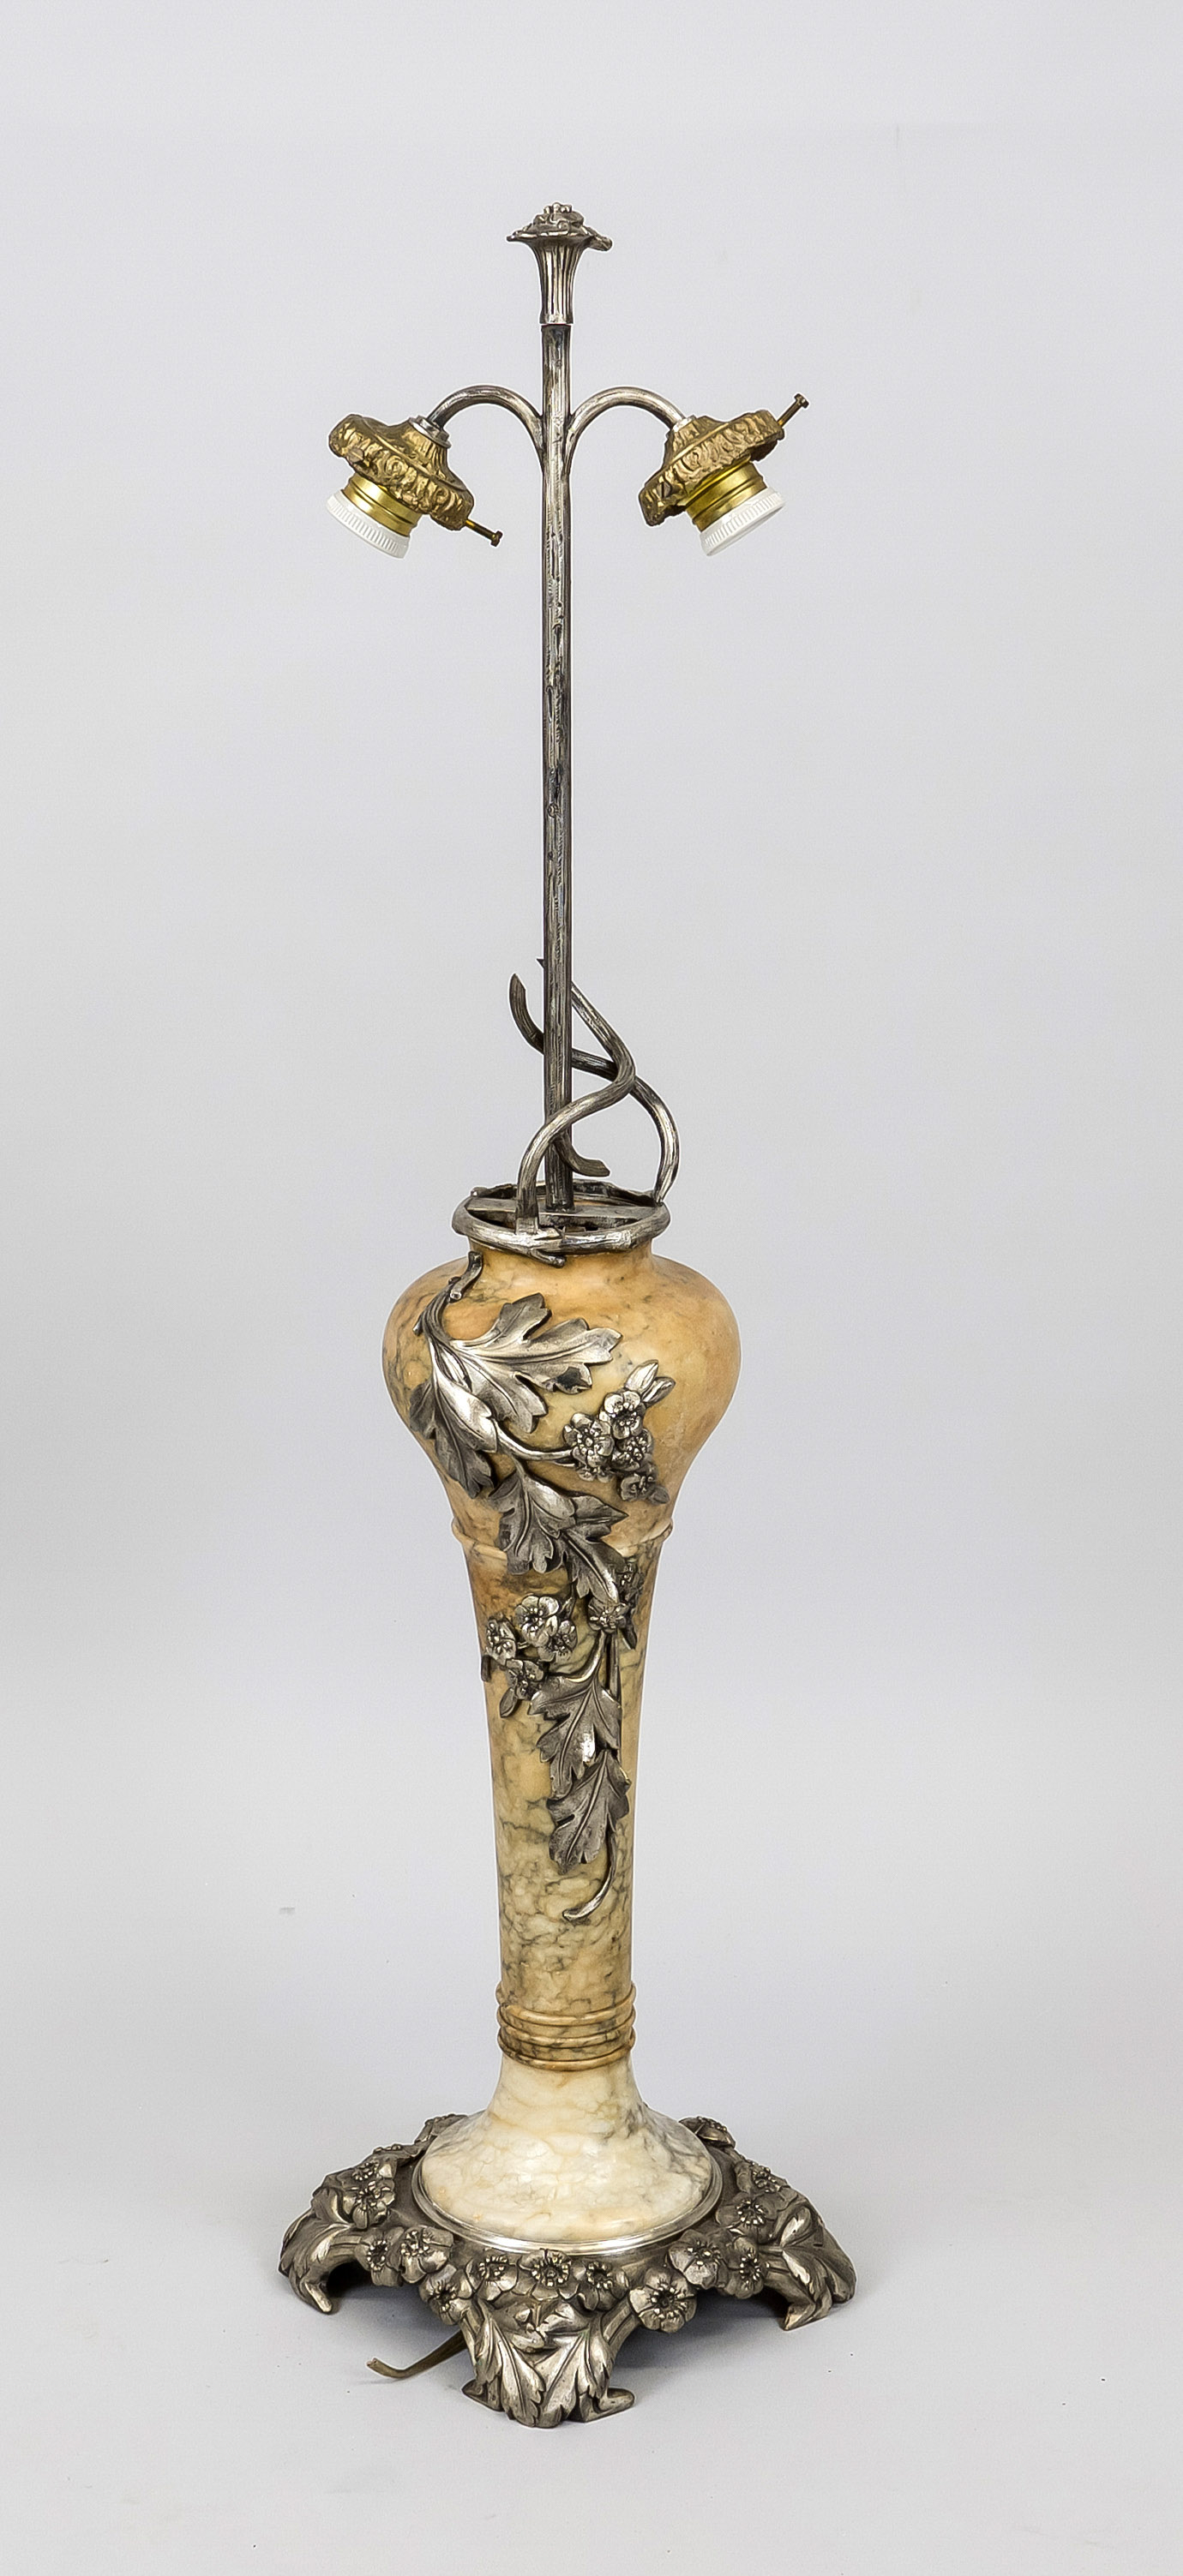 Table lamp, late 19th century, marble vase with metal mounting and floral application. Upper shaft